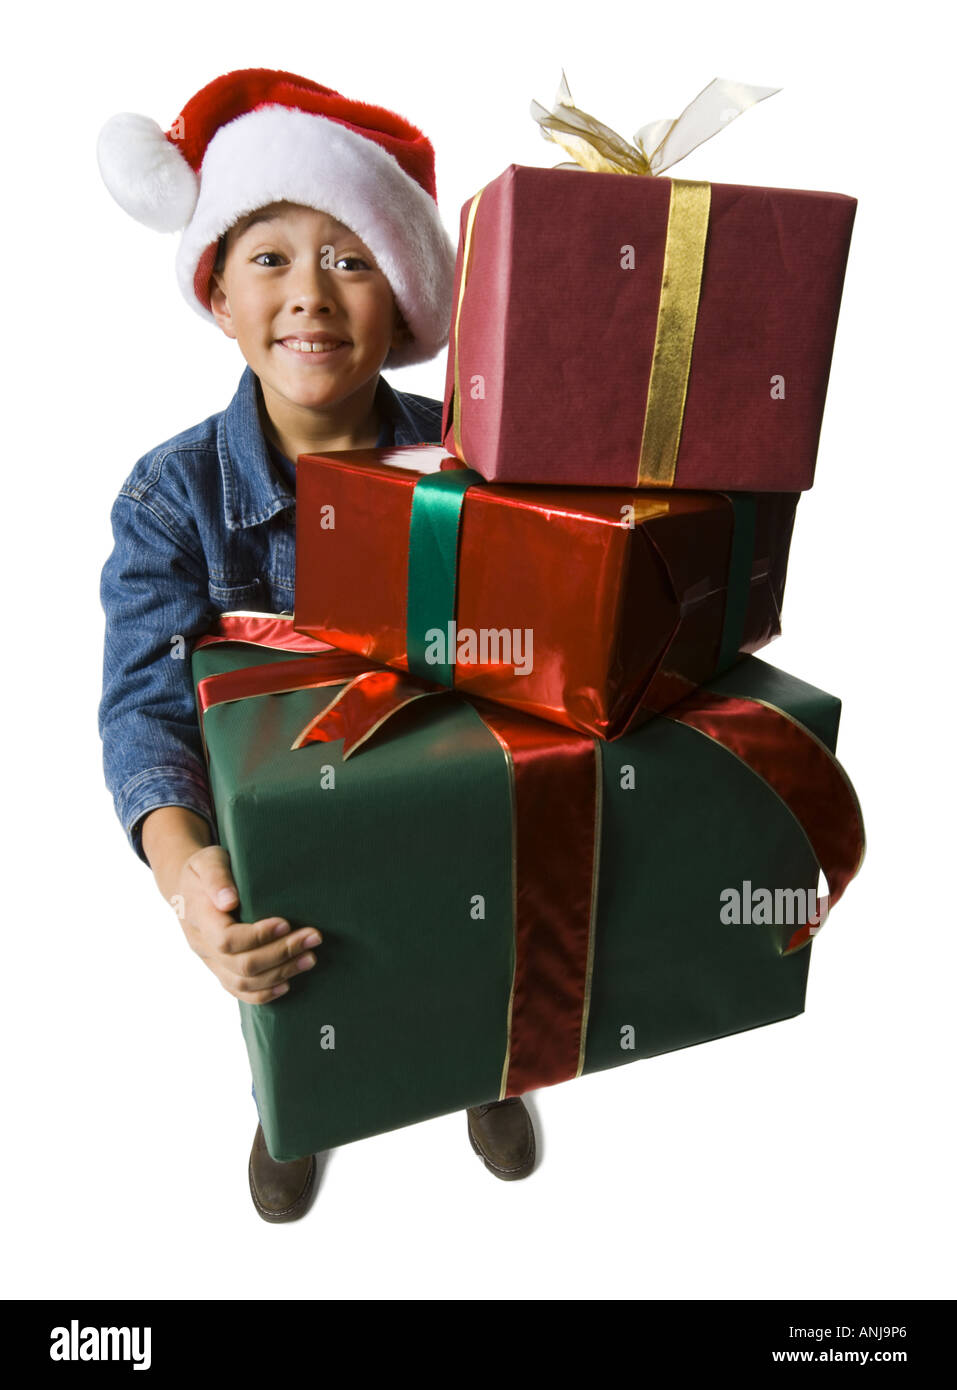 Portrait of a boy holding Christmas presents Stock Photo